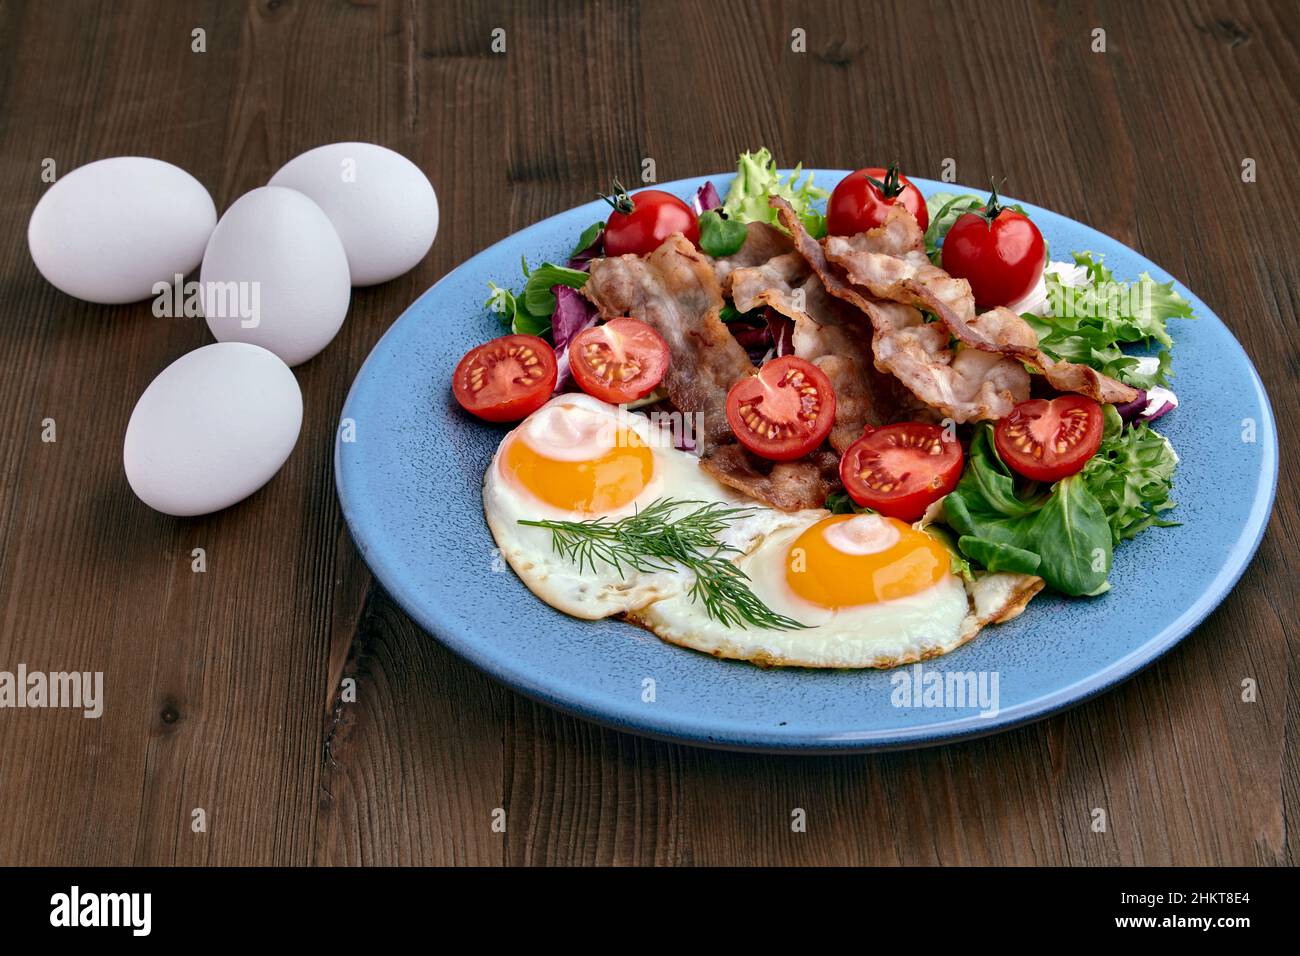 Fried eggs with bacon, lettuce and cherry tomatoes on a blue plate Stock Photo